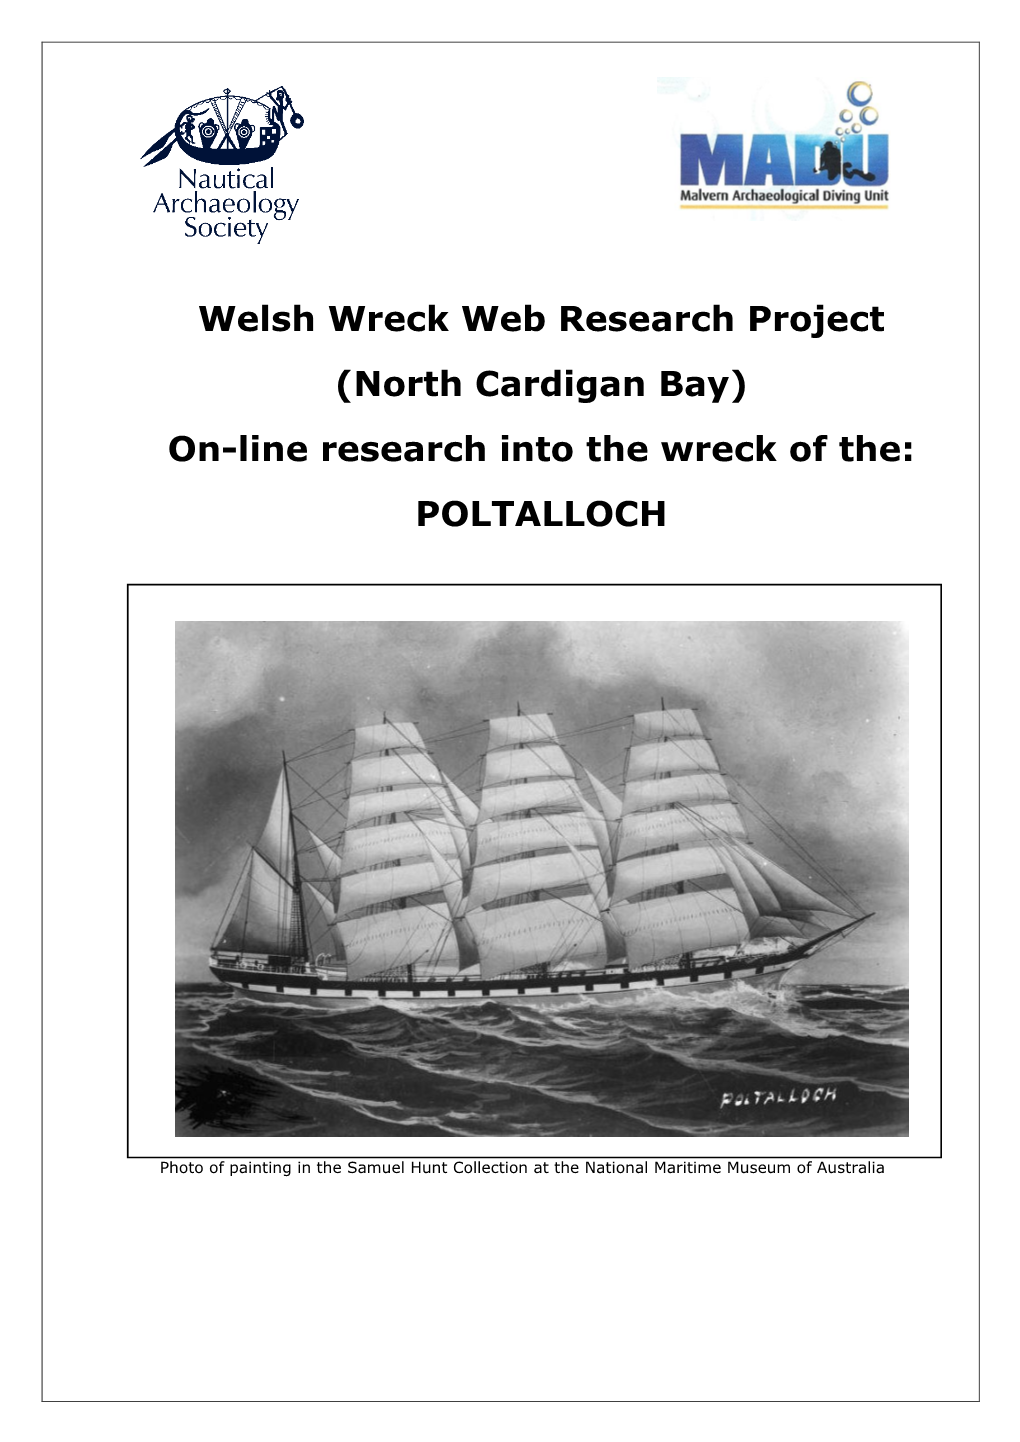 Welsh Wreck Web Research Project (North Cardigan Bay) On-Line Research Into the Wreck of The: POLTALLOCH